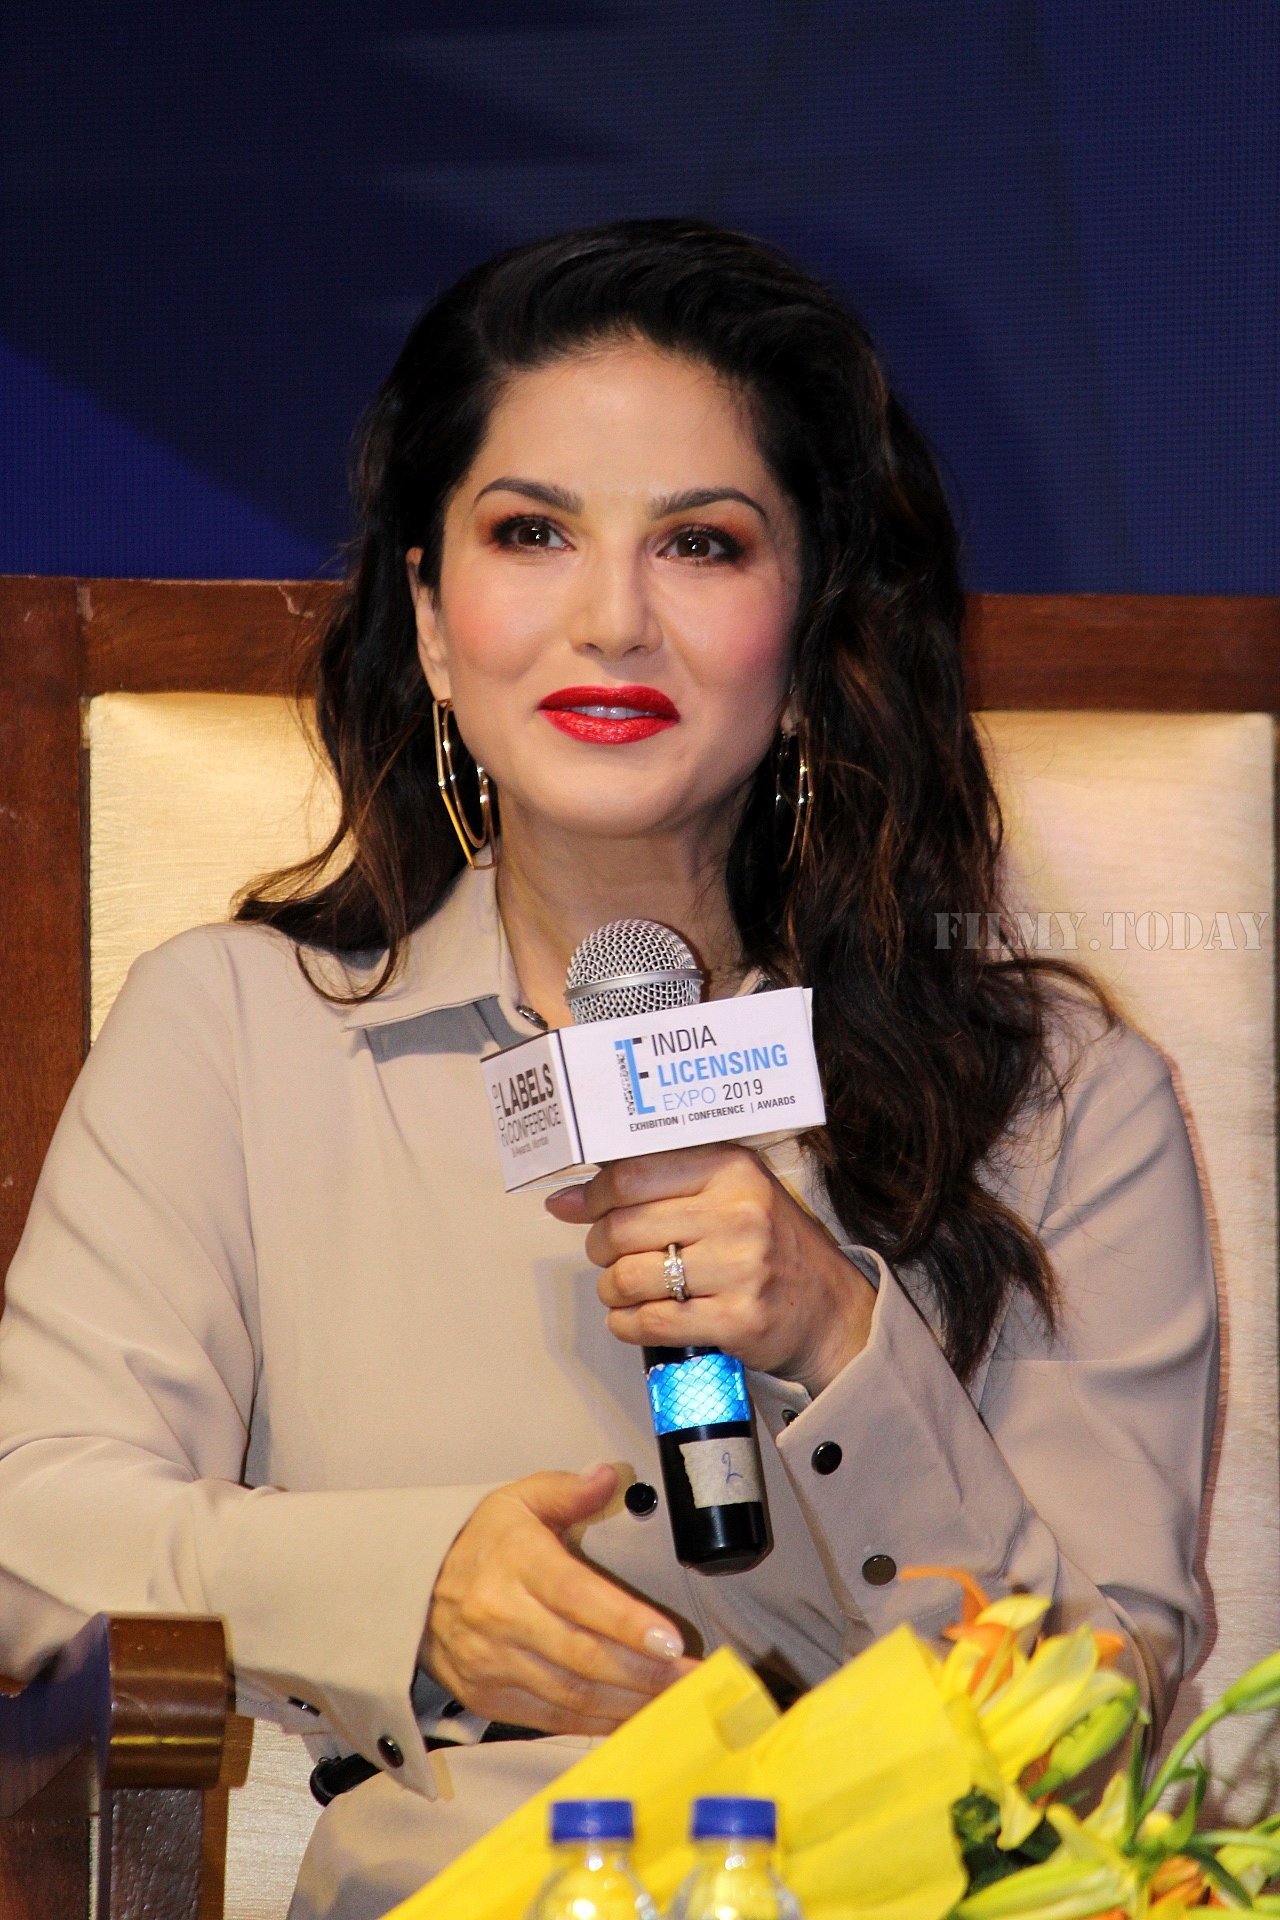 Photos: Sunny Leone Unveils Her Fashion Brand At India Licensing Expo | Picture 1661585